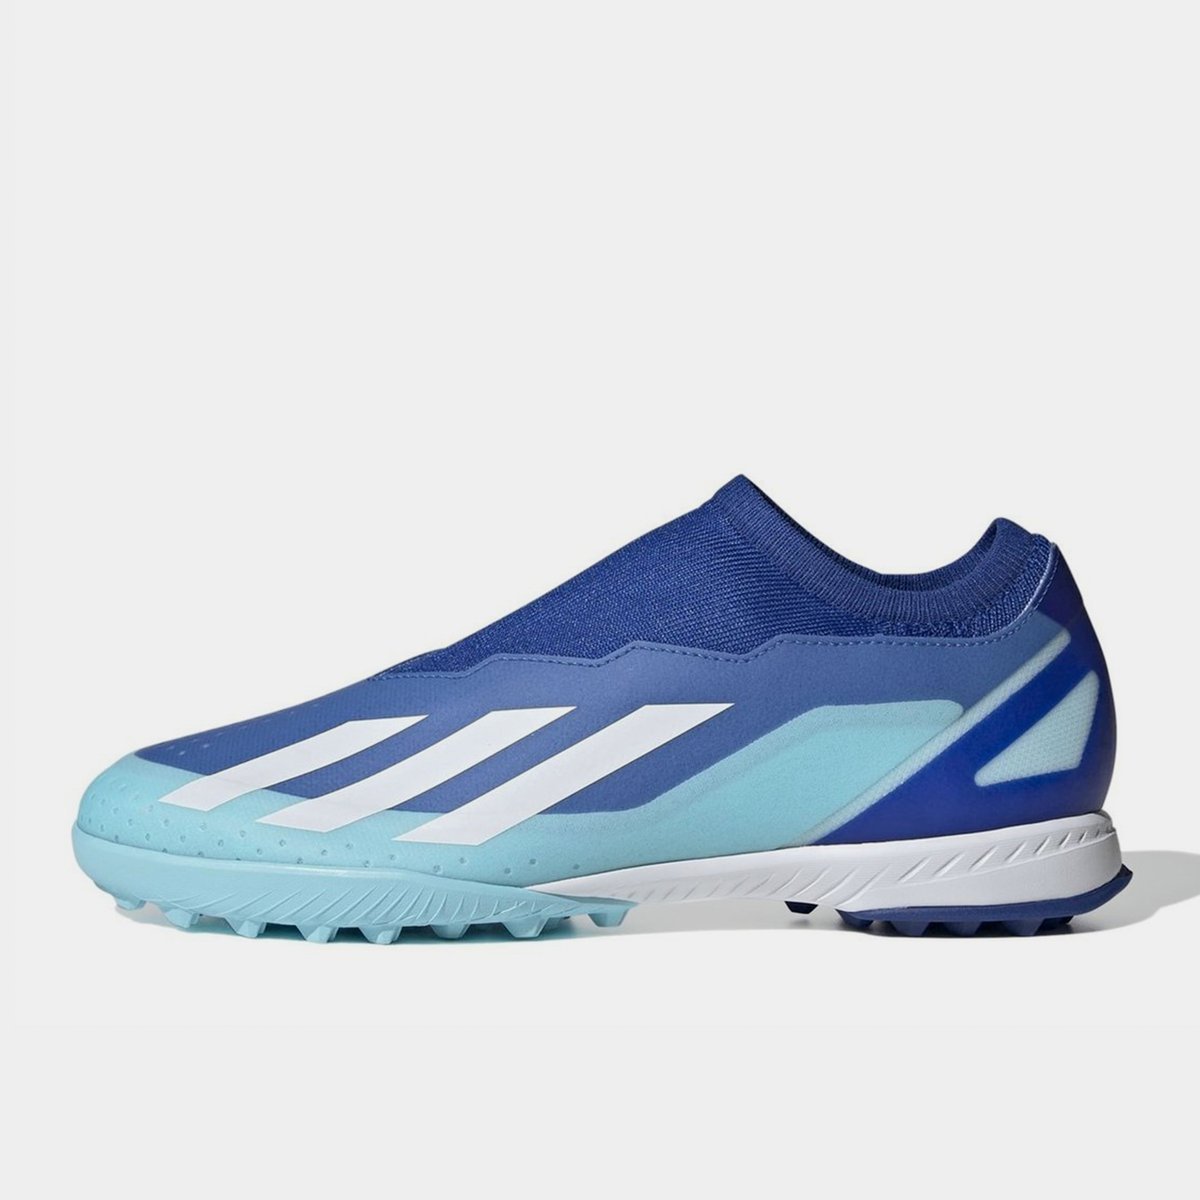 adidas Football Trainers - Lovell Sports